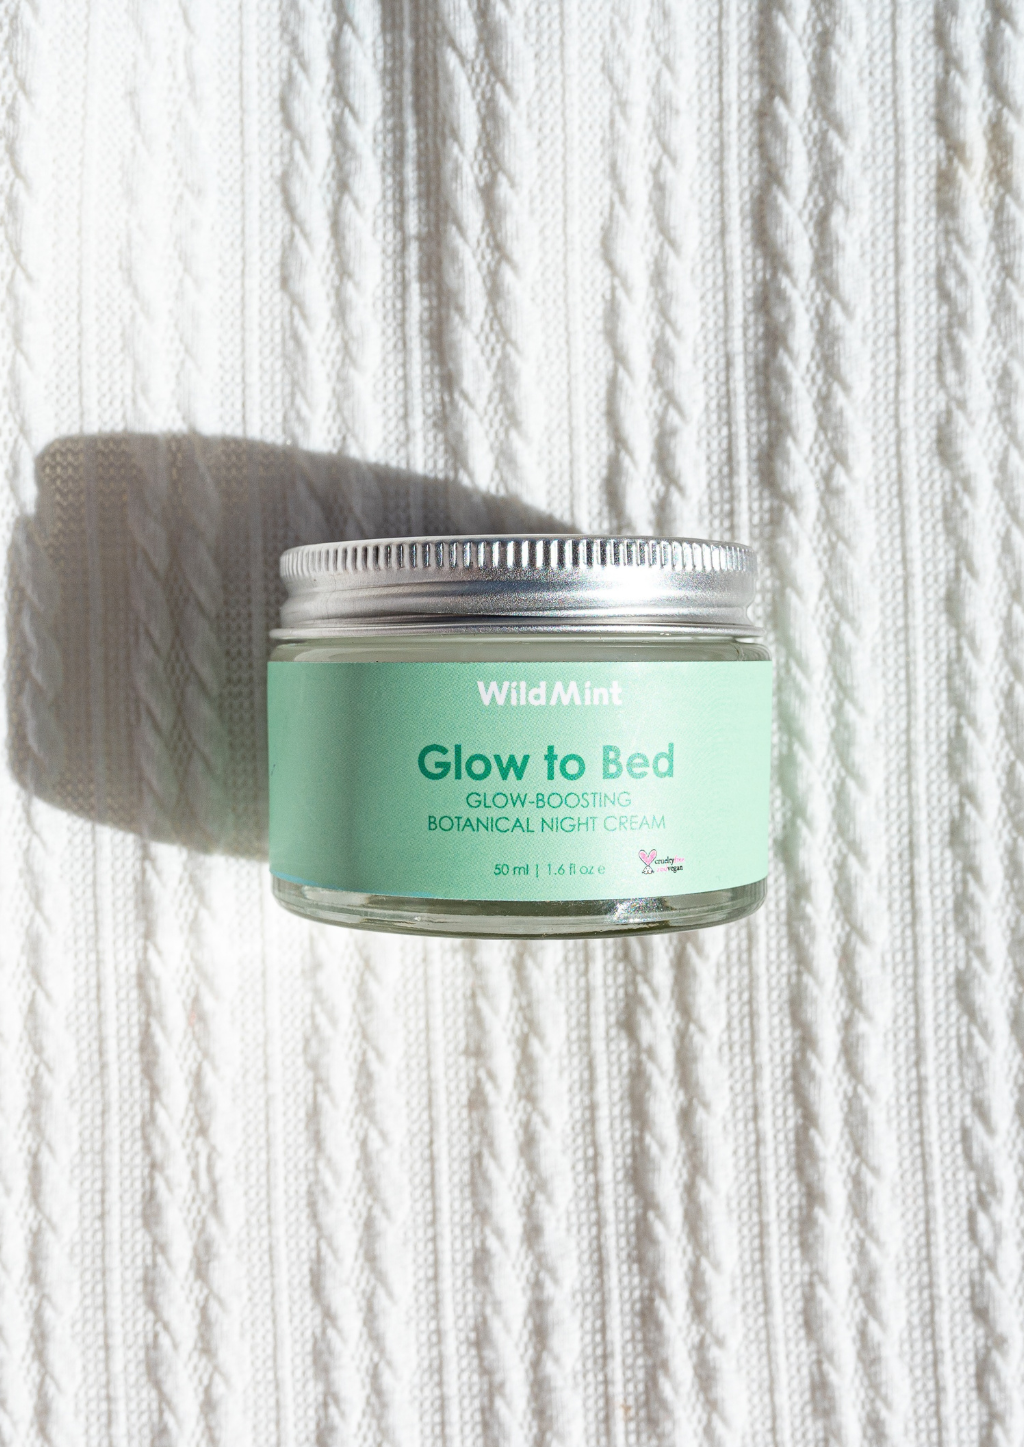 Glow to Bed